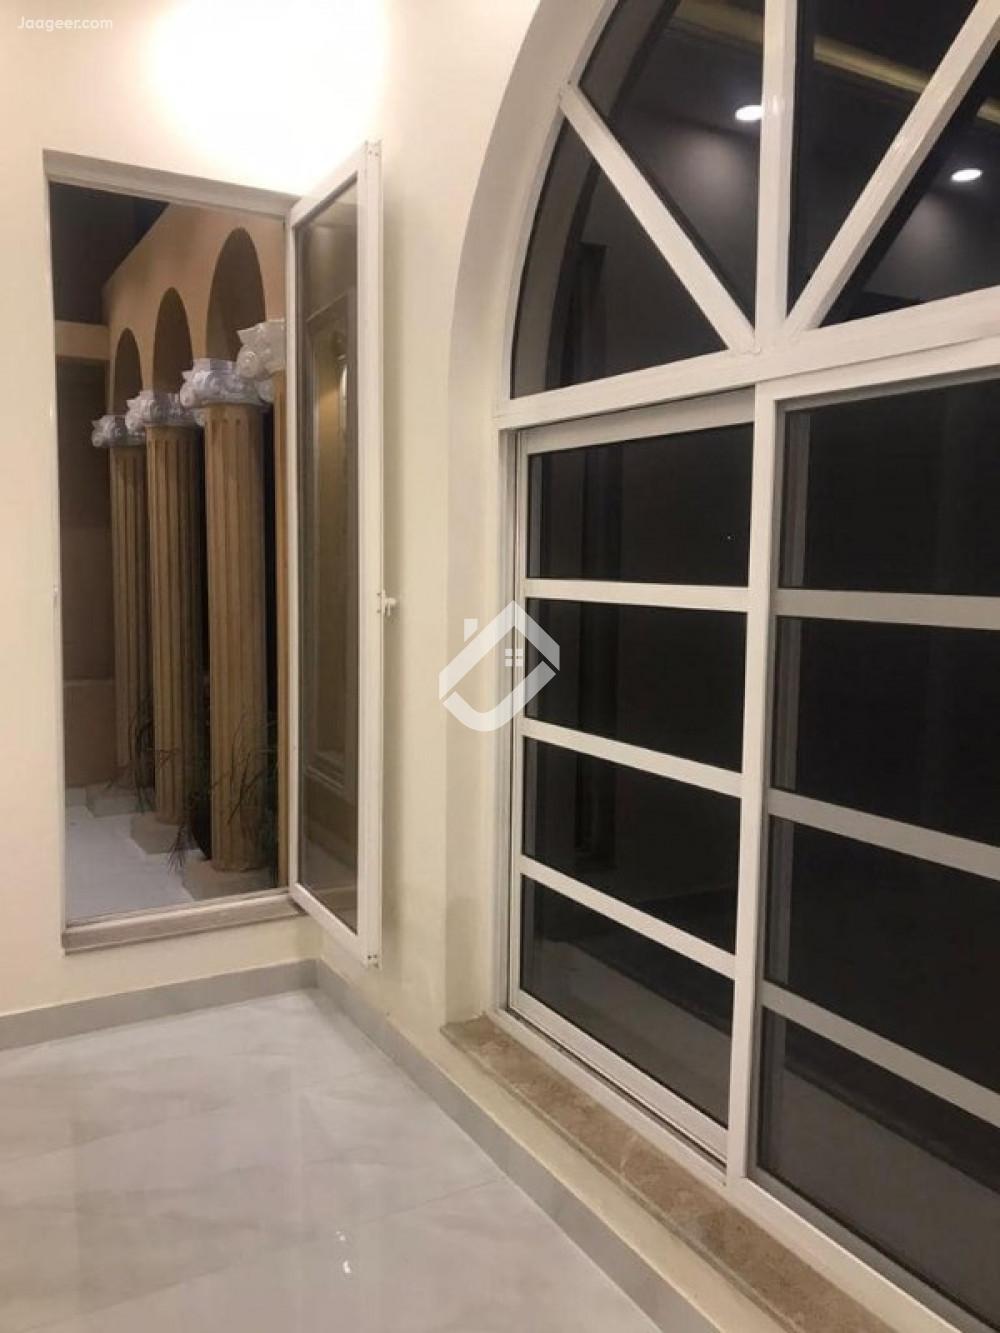 Main image 10 Marla Furnished Upper Portion House For Rent In Paragon City  ---